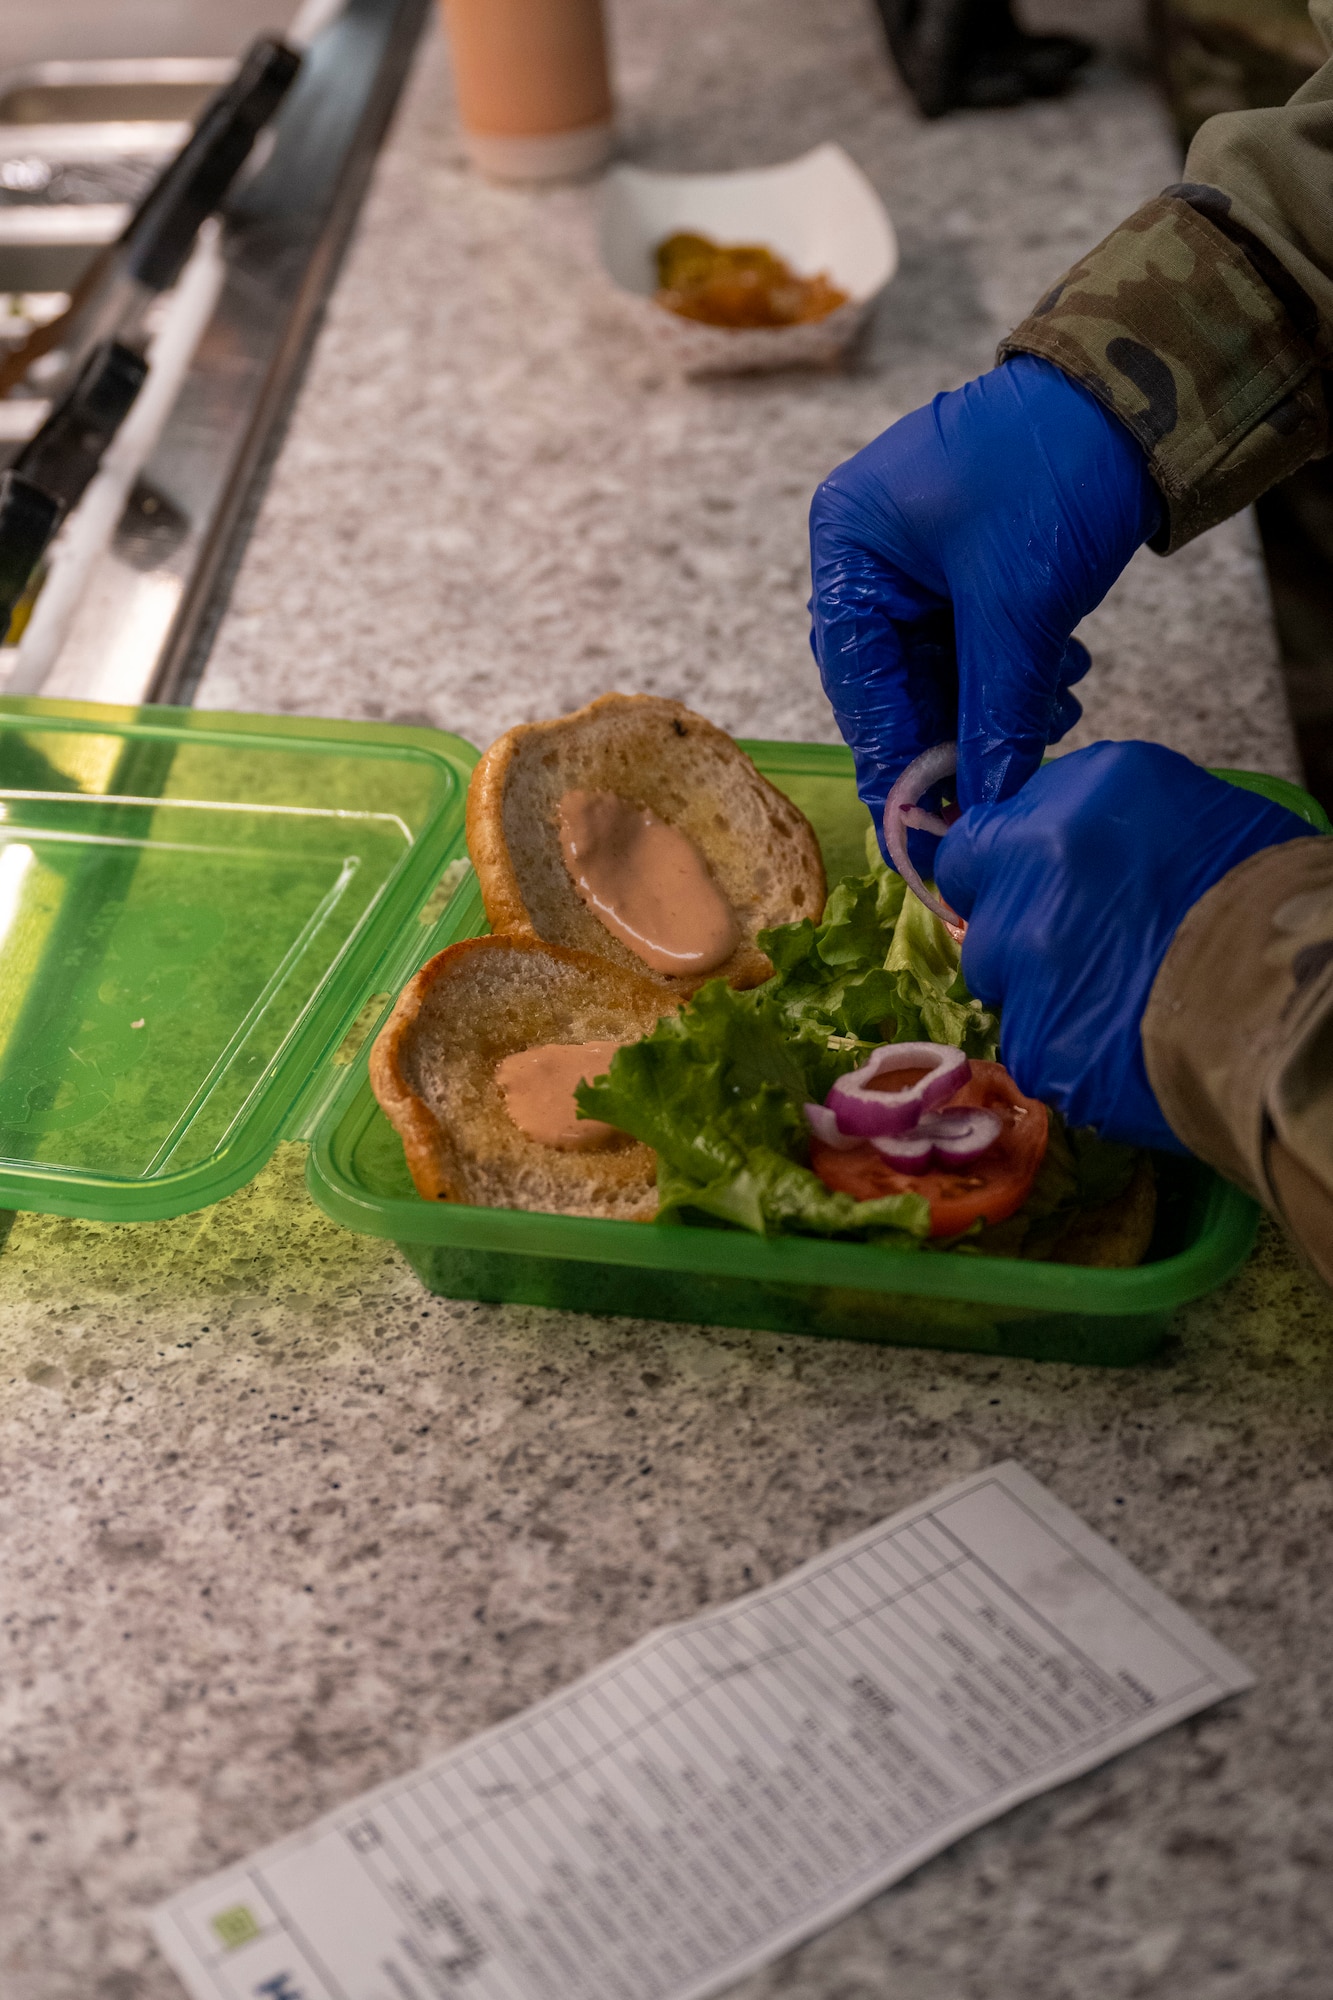 Airman 1st Class Hunter Pearson, 4th Force Support Squadron food service specialist, assembles a cheeseburger in an OZZI reusable food container at Seymour Johnson Air Force Base, North Carolina, Jan. 24, 2023. The OZZI food container is a replacement for previously used foam takeout containers to cut down on both costs and generated waste. (U.S. Air Force photo by Senior Airman Kevin Holloway)